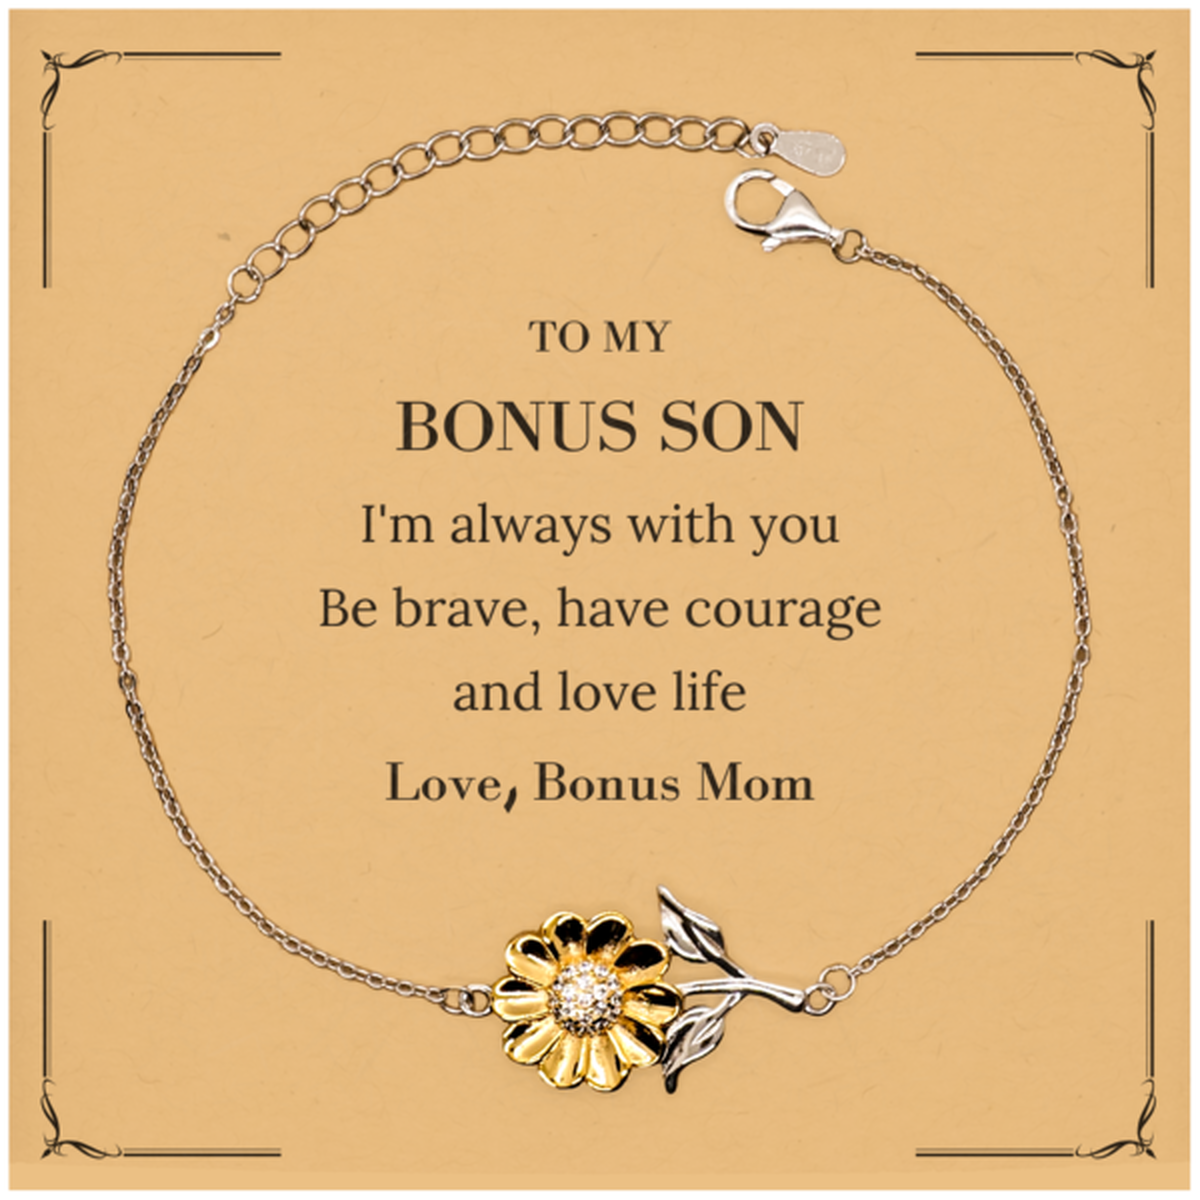 To My Bonus Son Gifts from Bonus Mom, Unique Sunflower Bracelet Inspirational Christmas Birthday Graduation Gifts for Bonus Son I'm always with you. Be brave, have courage and love life. Love, Bonus Mom